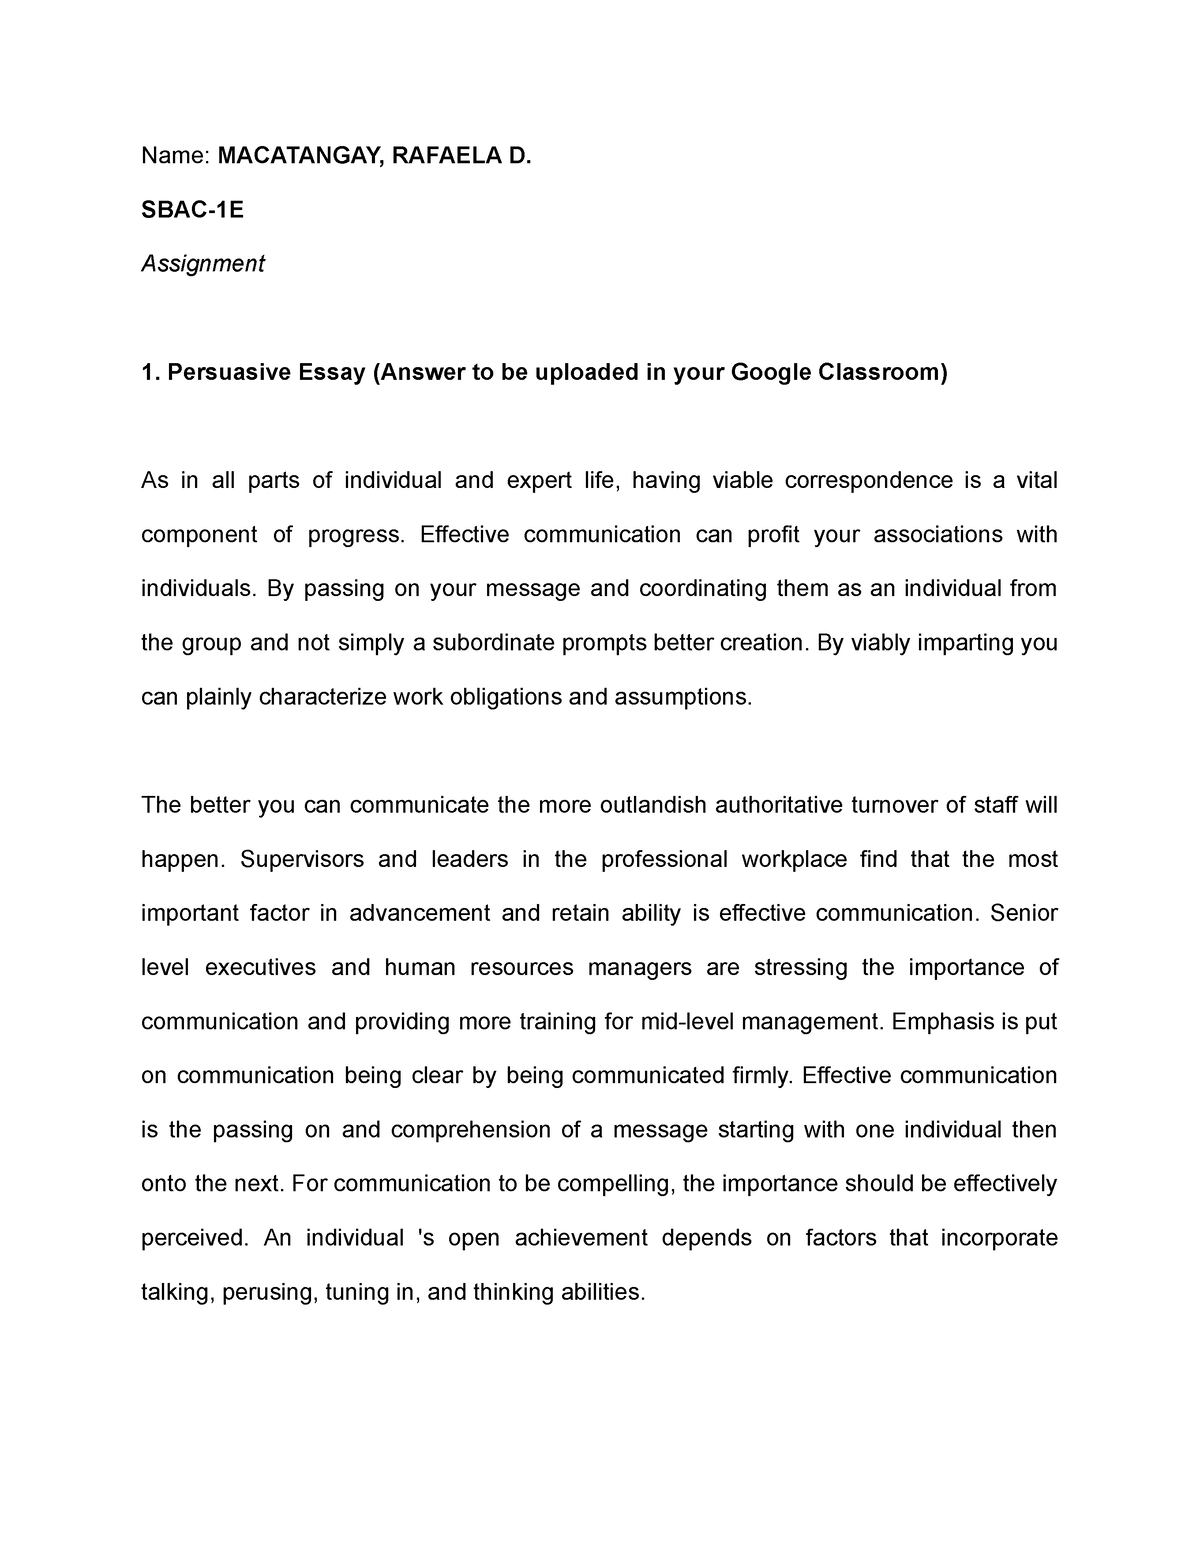 thesis on persuasive communication